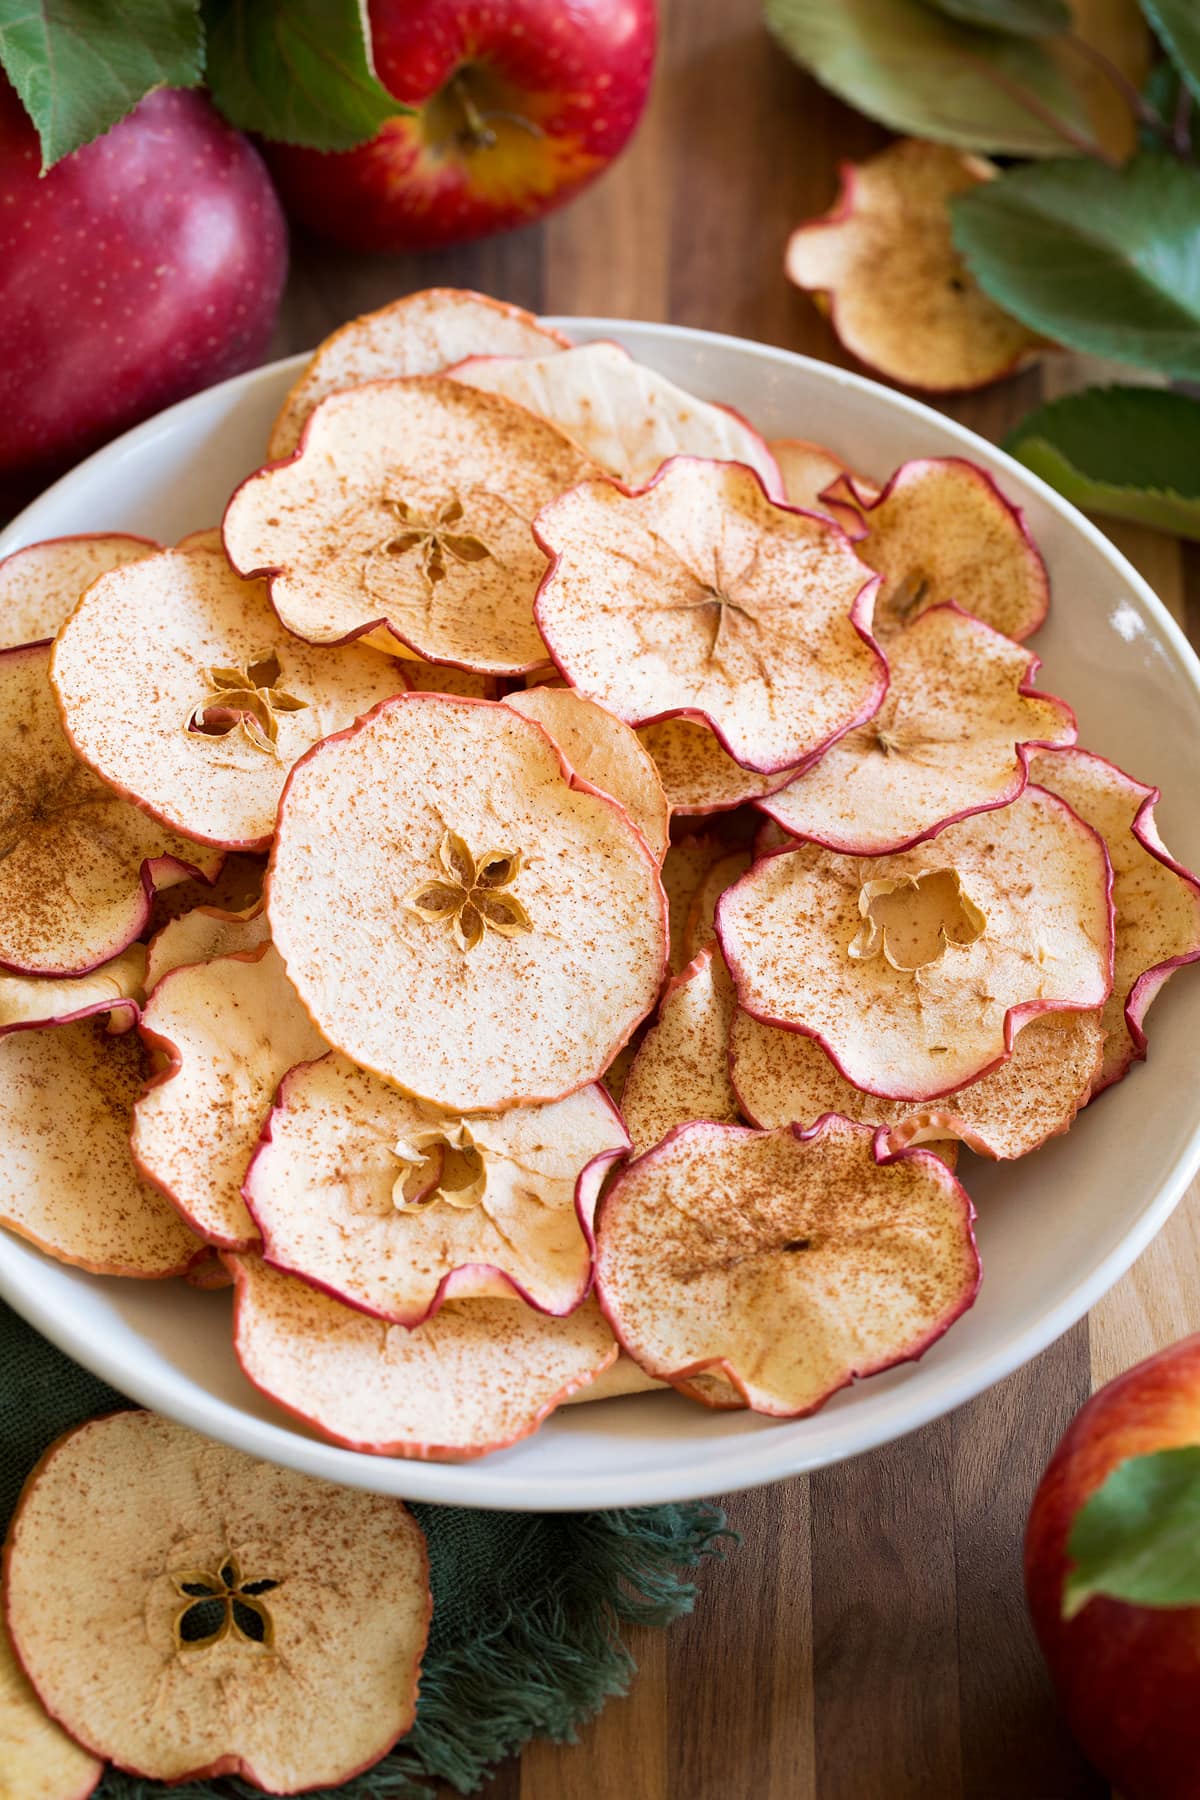 Apple chips shown in a white bowl on a wooden tabletop with fresh apples and leaves surrounding them.